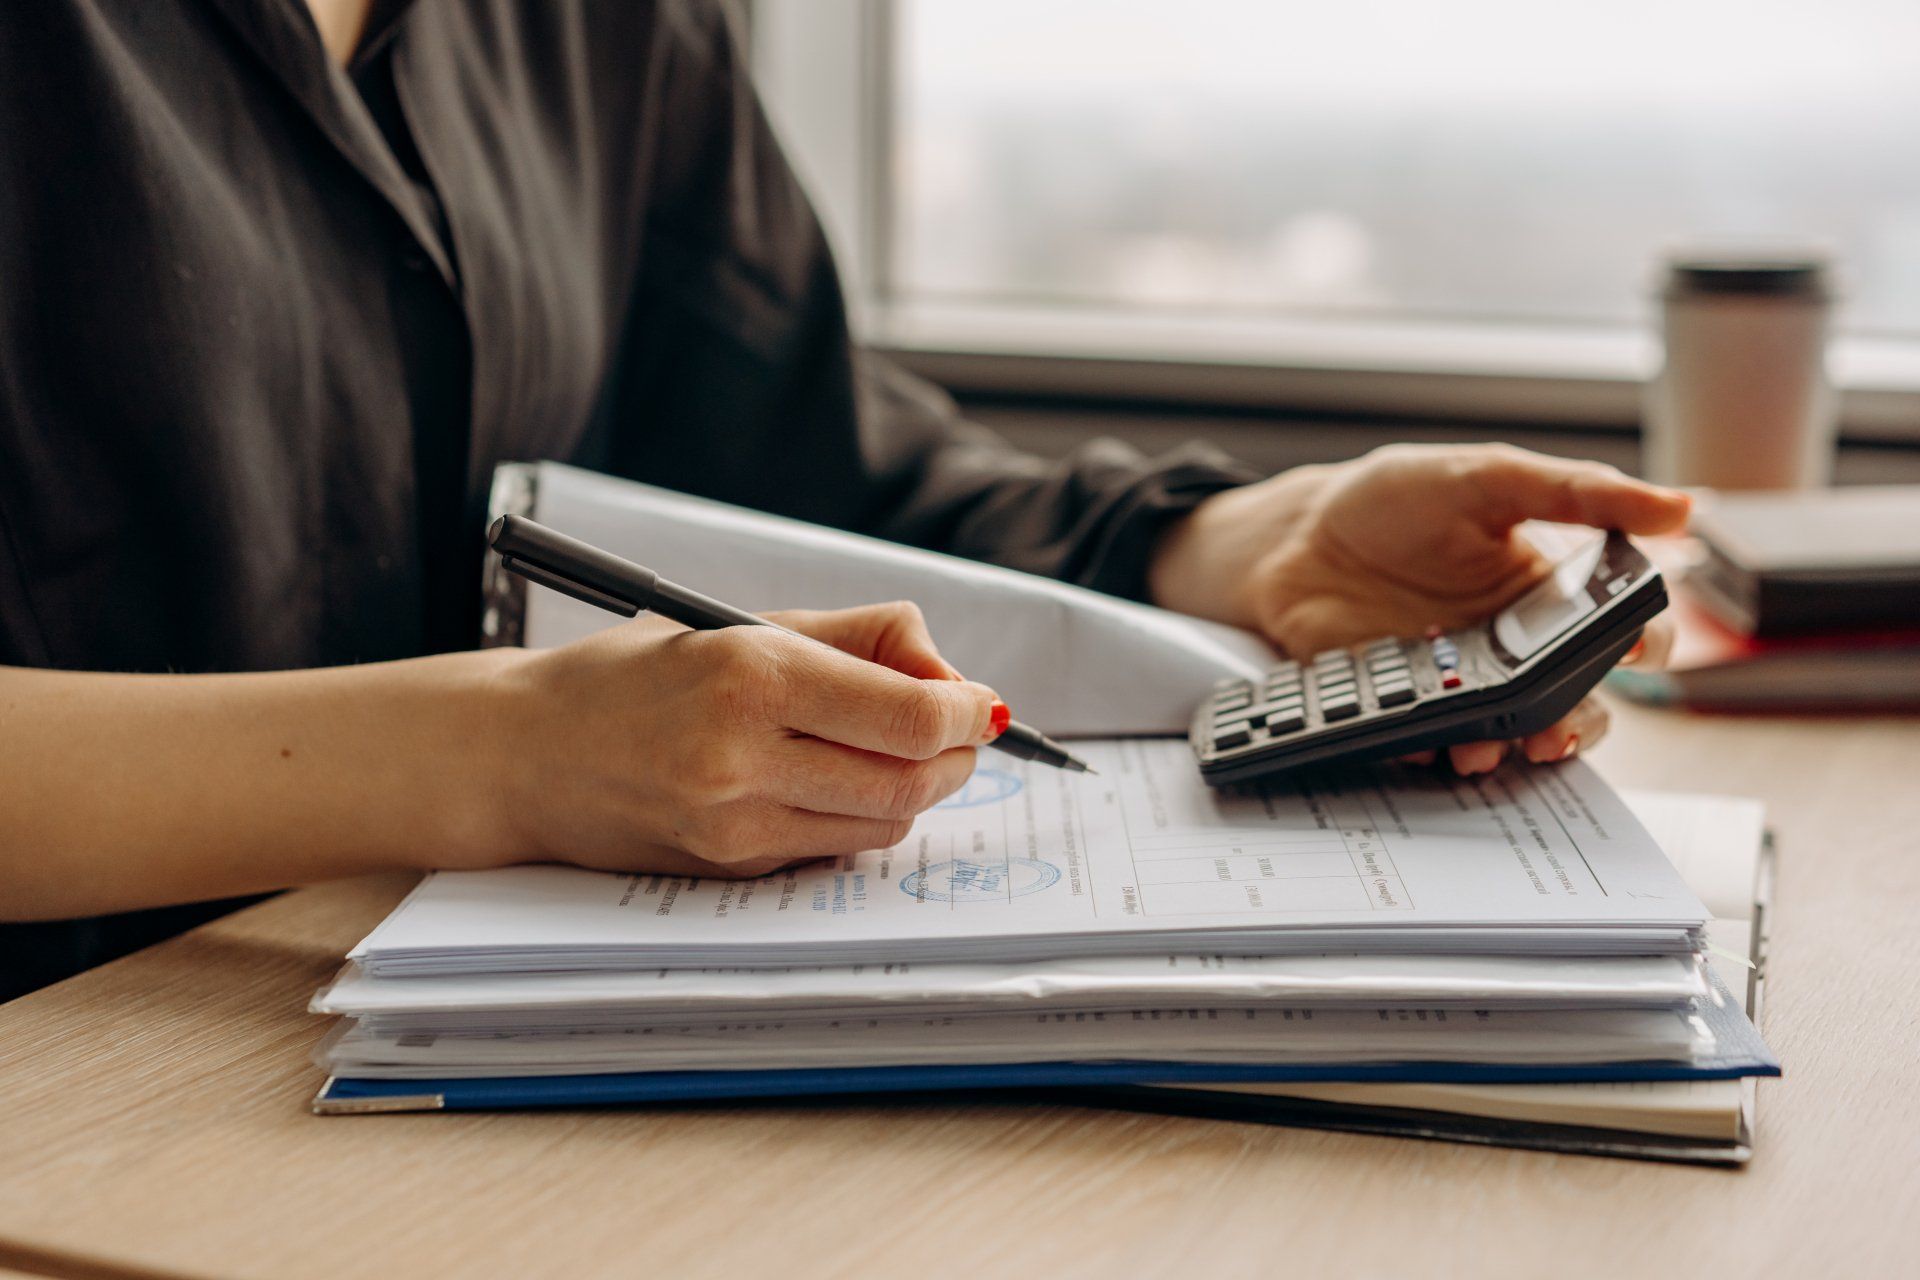 This is an image showing a woman's hands holding a pen and calculator over a pile of documents.